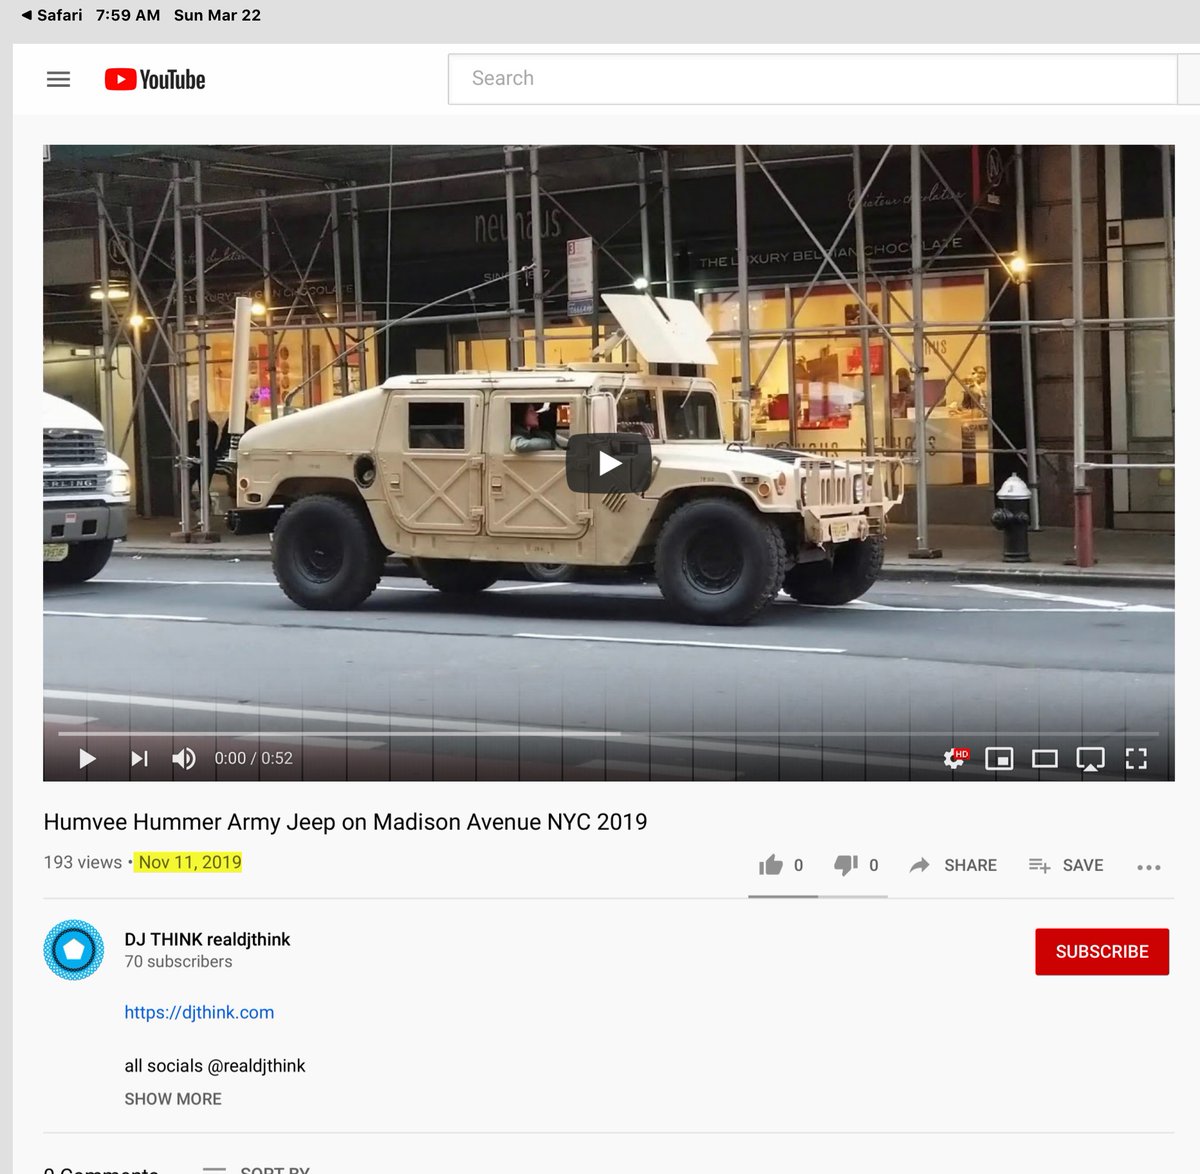 NYC - this video was uploaded to YouTube on November 11, 2019 (presumably for the NYC Veterans Day parade)